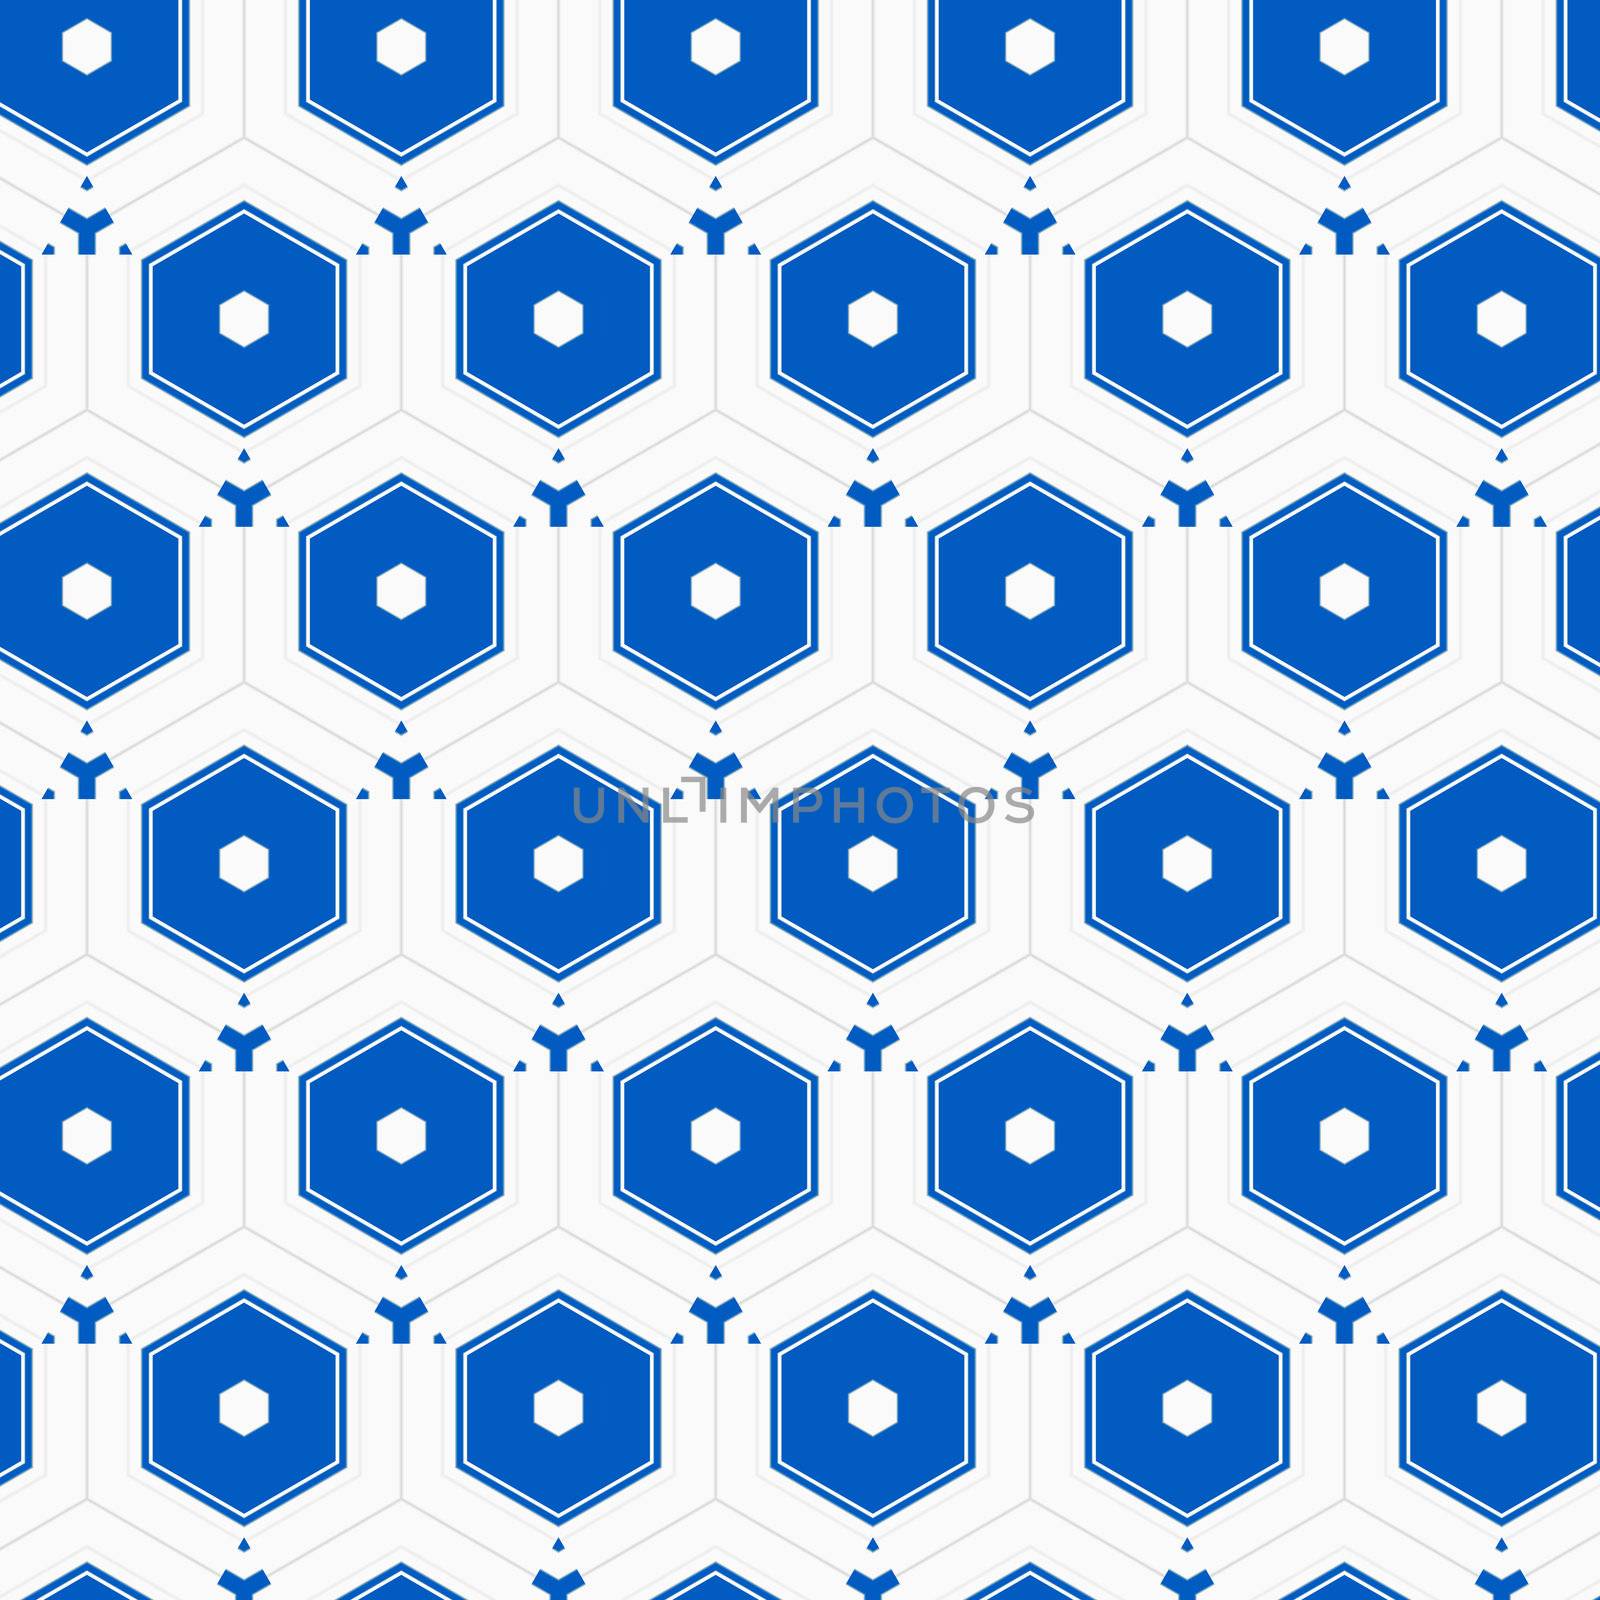 An abstract illustrated repeating hexagonal pattern done in blue and white. It's inspiration is Victorian bathroom tile, but the design is contemporary.